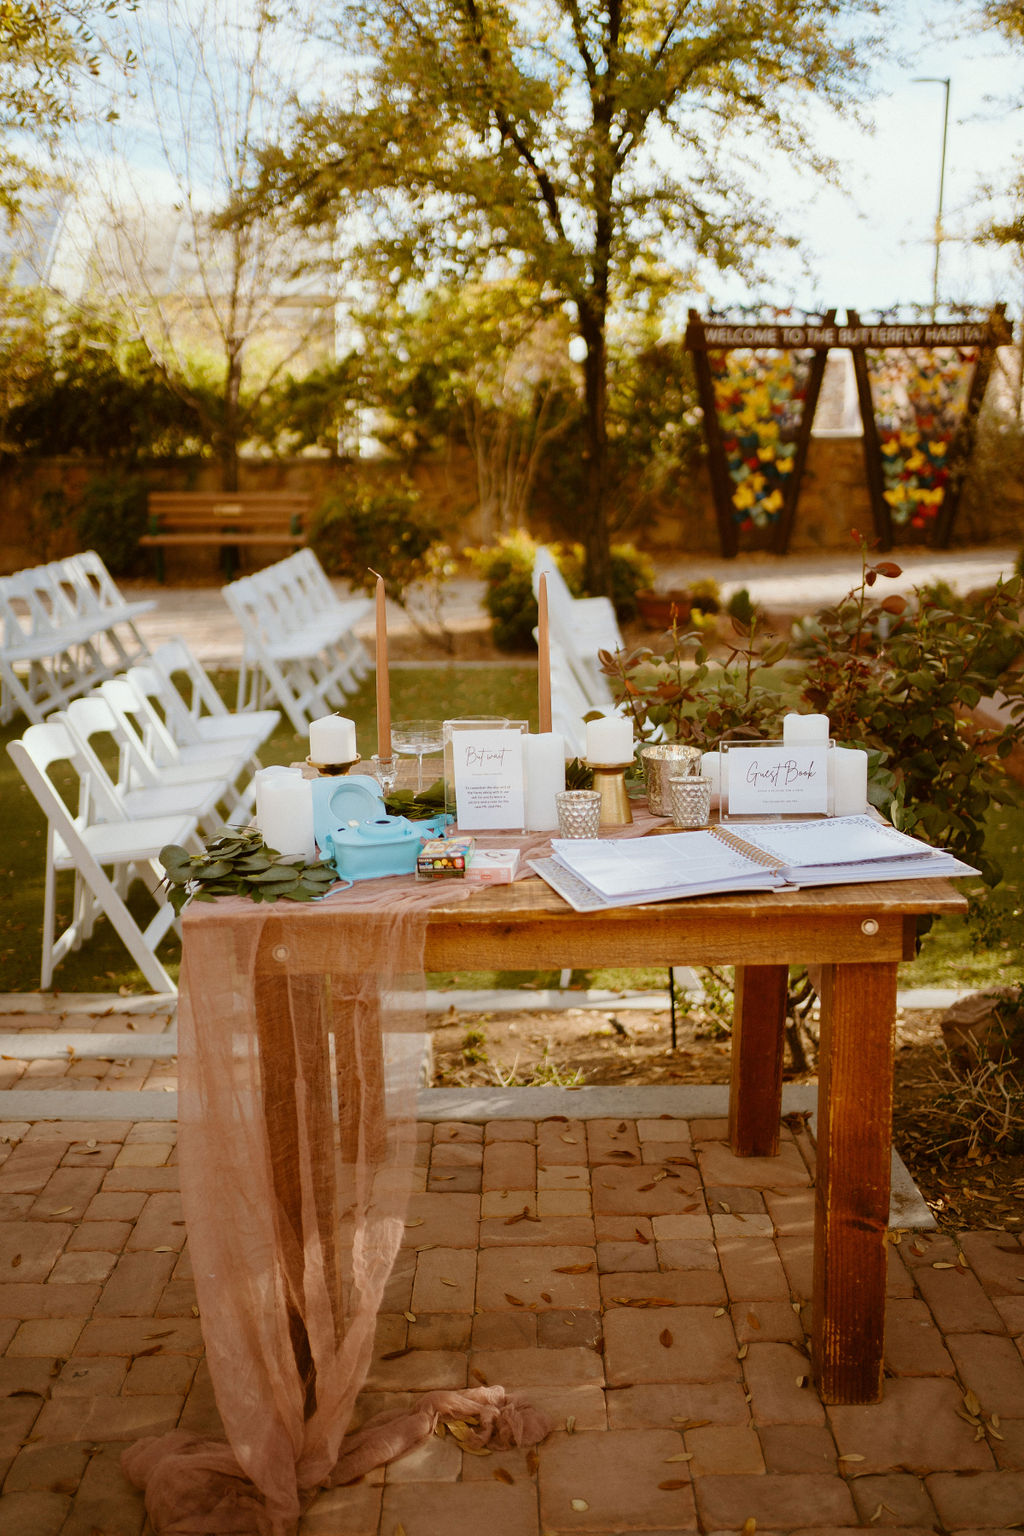 Guest Book & Picture Table at Ceremony 